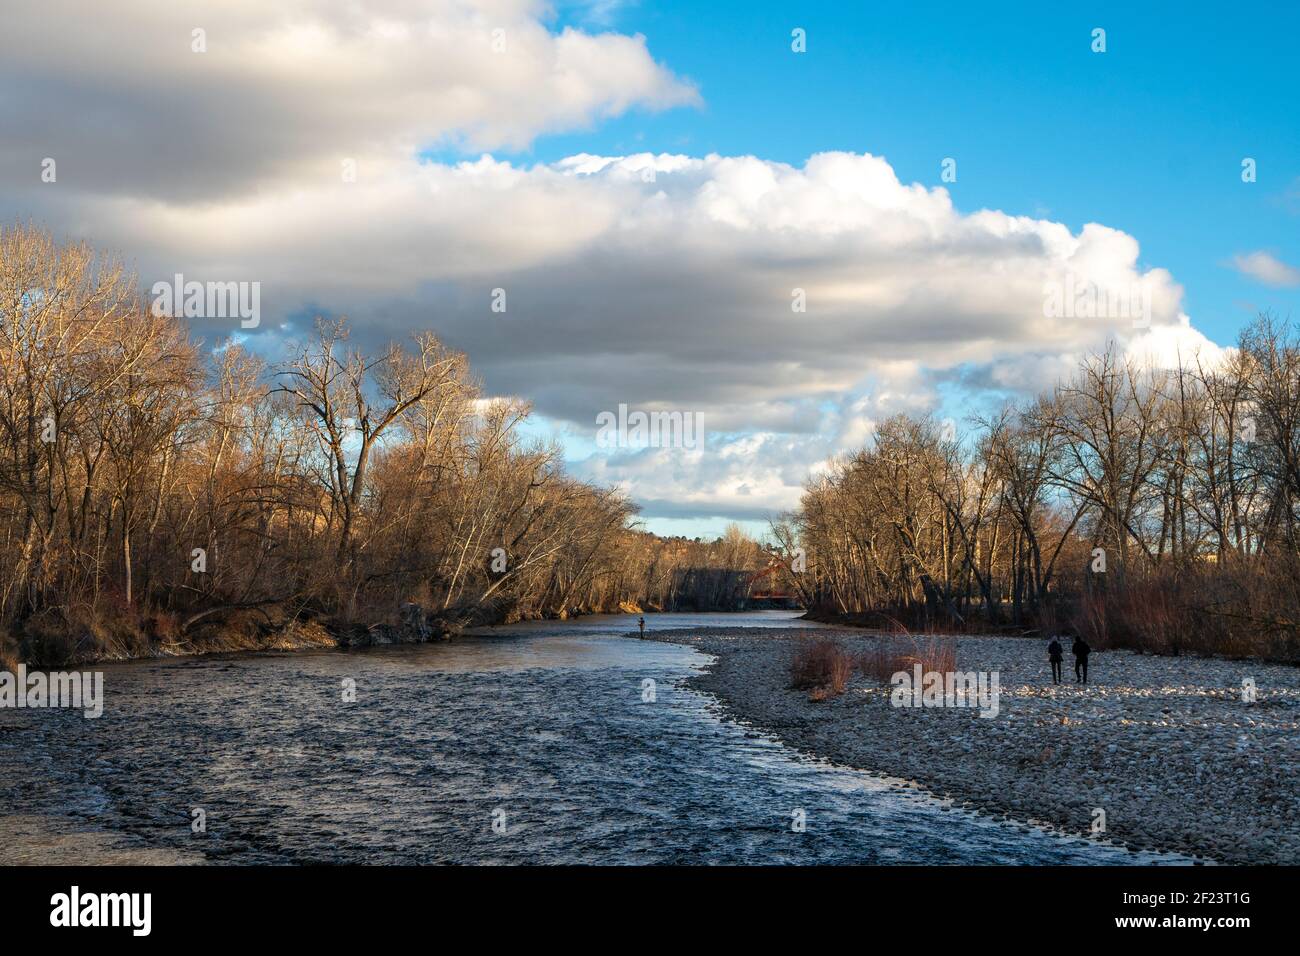 Late in the day on a February afternoon along Boise, Idaho's Boise, River. Stock Photo